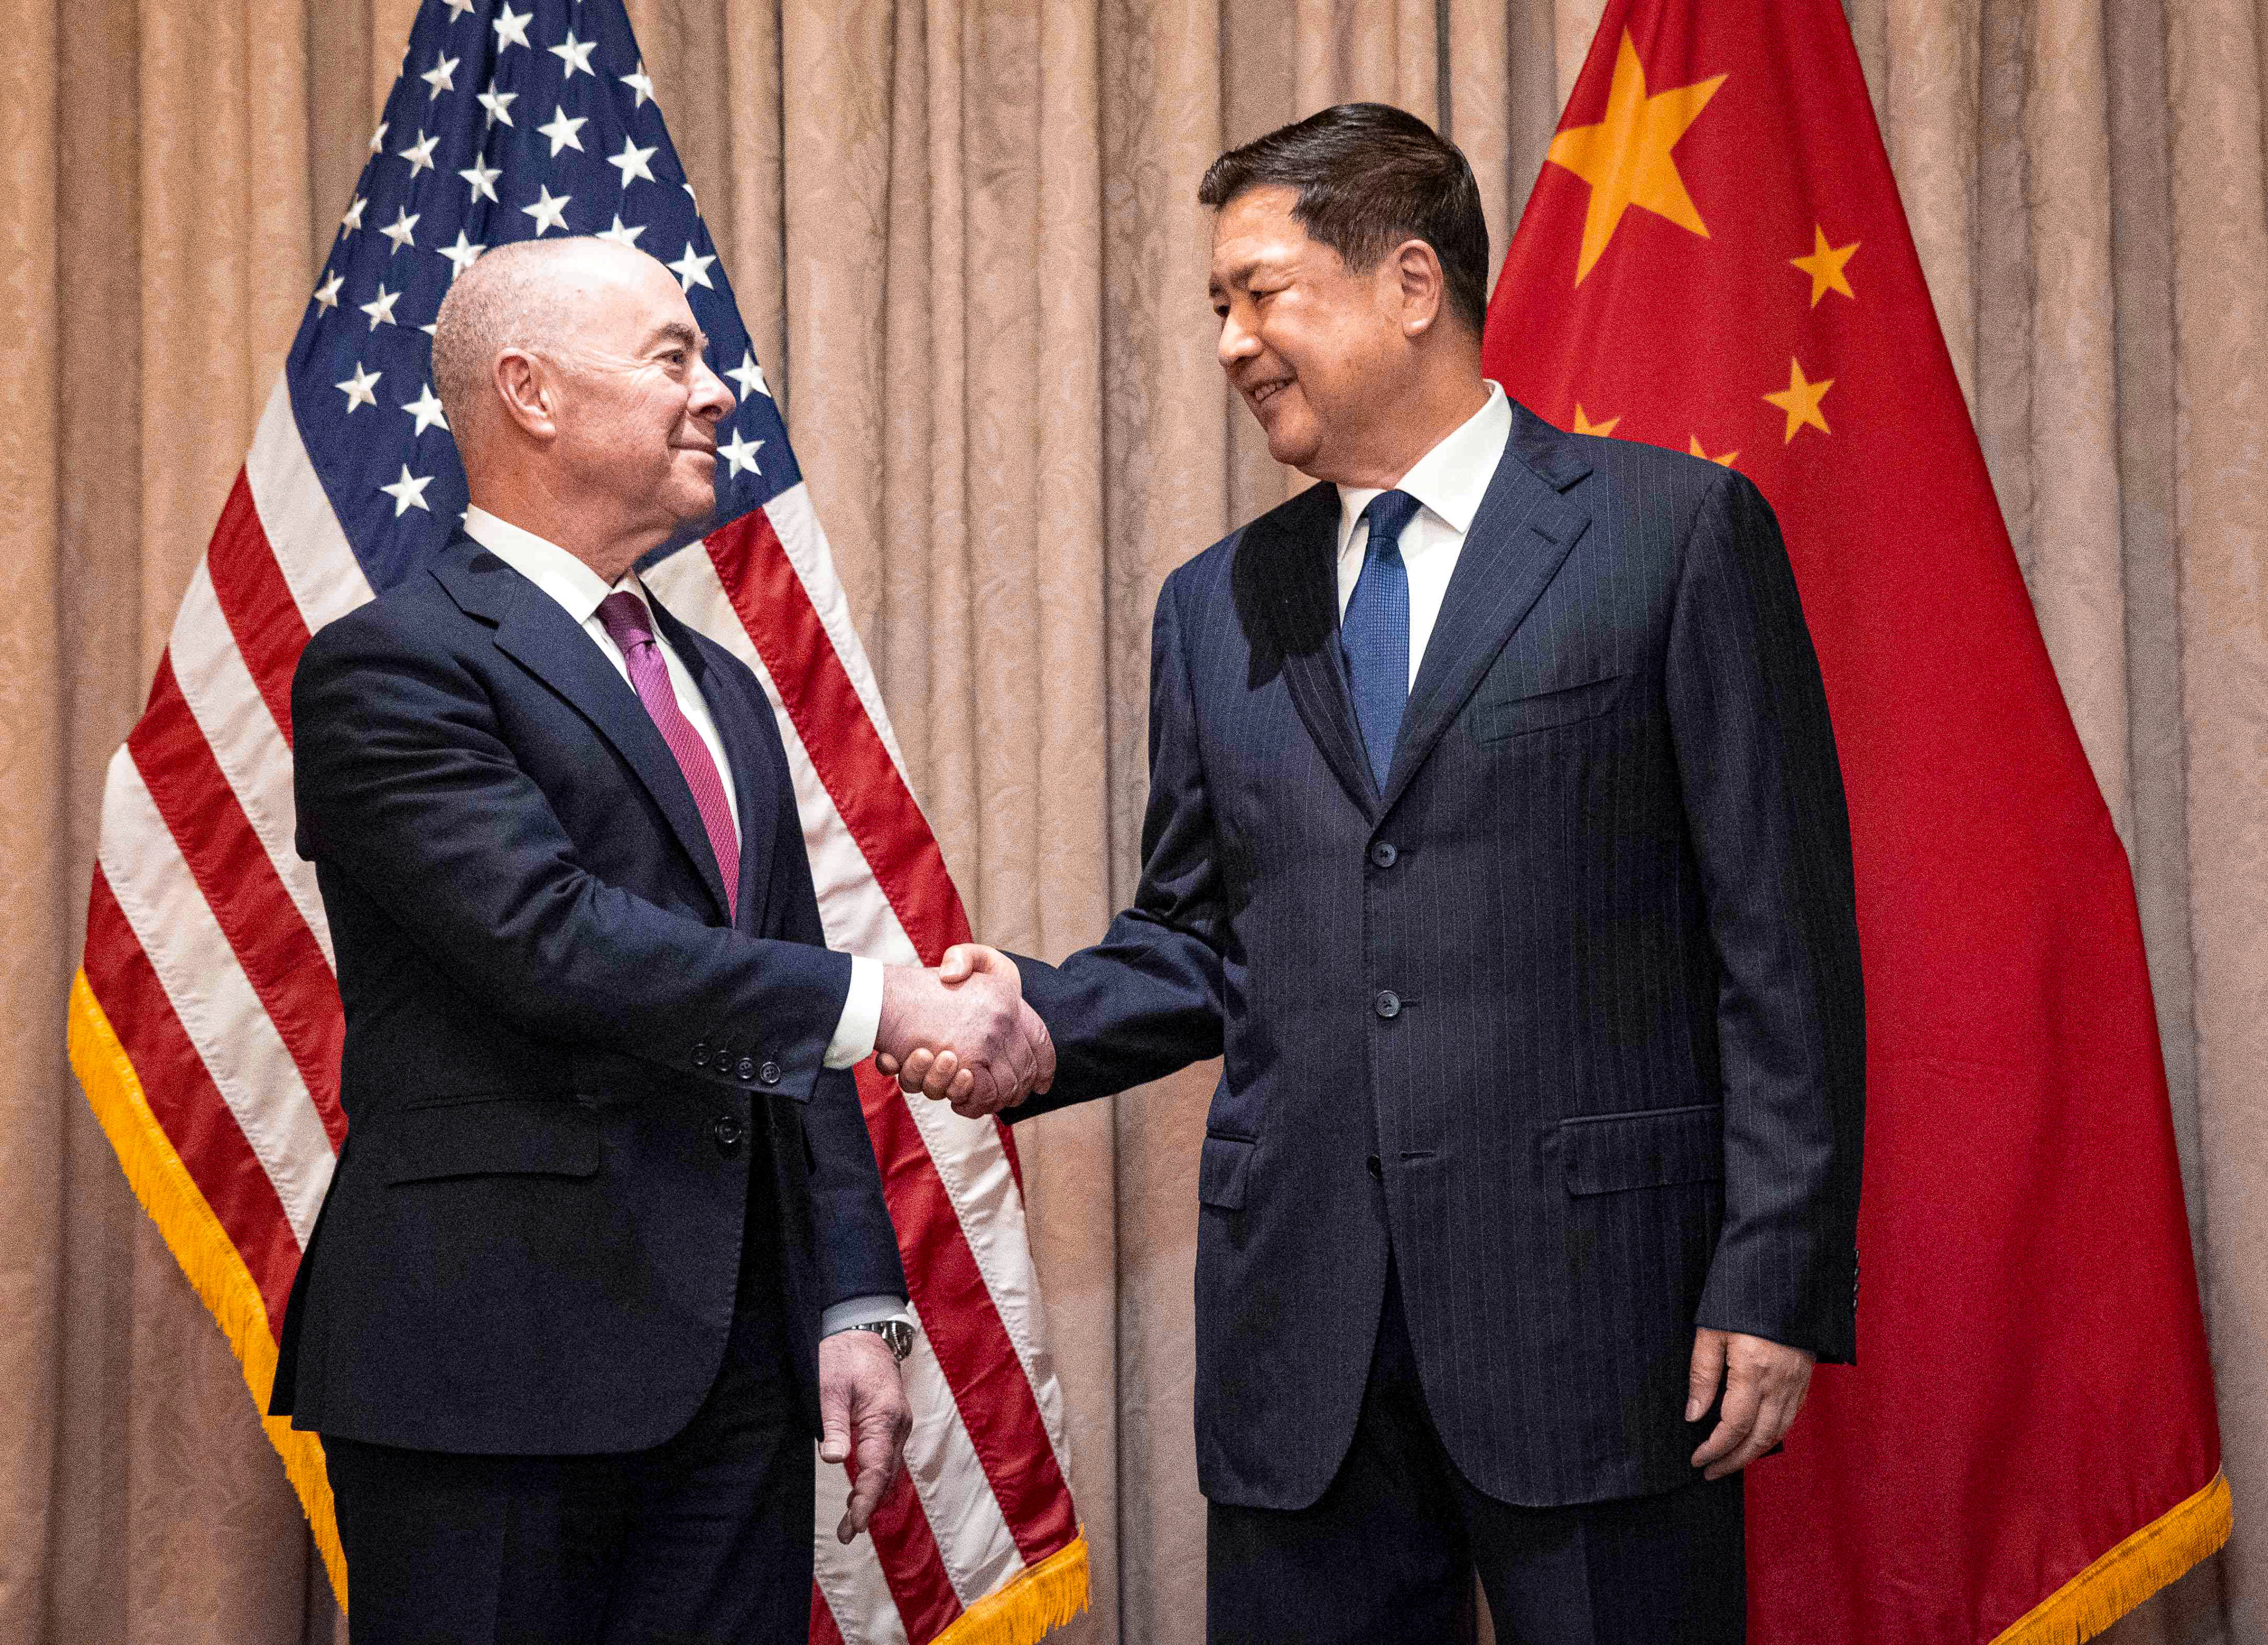 Chinese Public Security Minister Wang Xiaohong and US Homeland Security Secretary Alejandro Mayorkas greet each other in Vienna, Austria, on Sunday. Photo: AFP